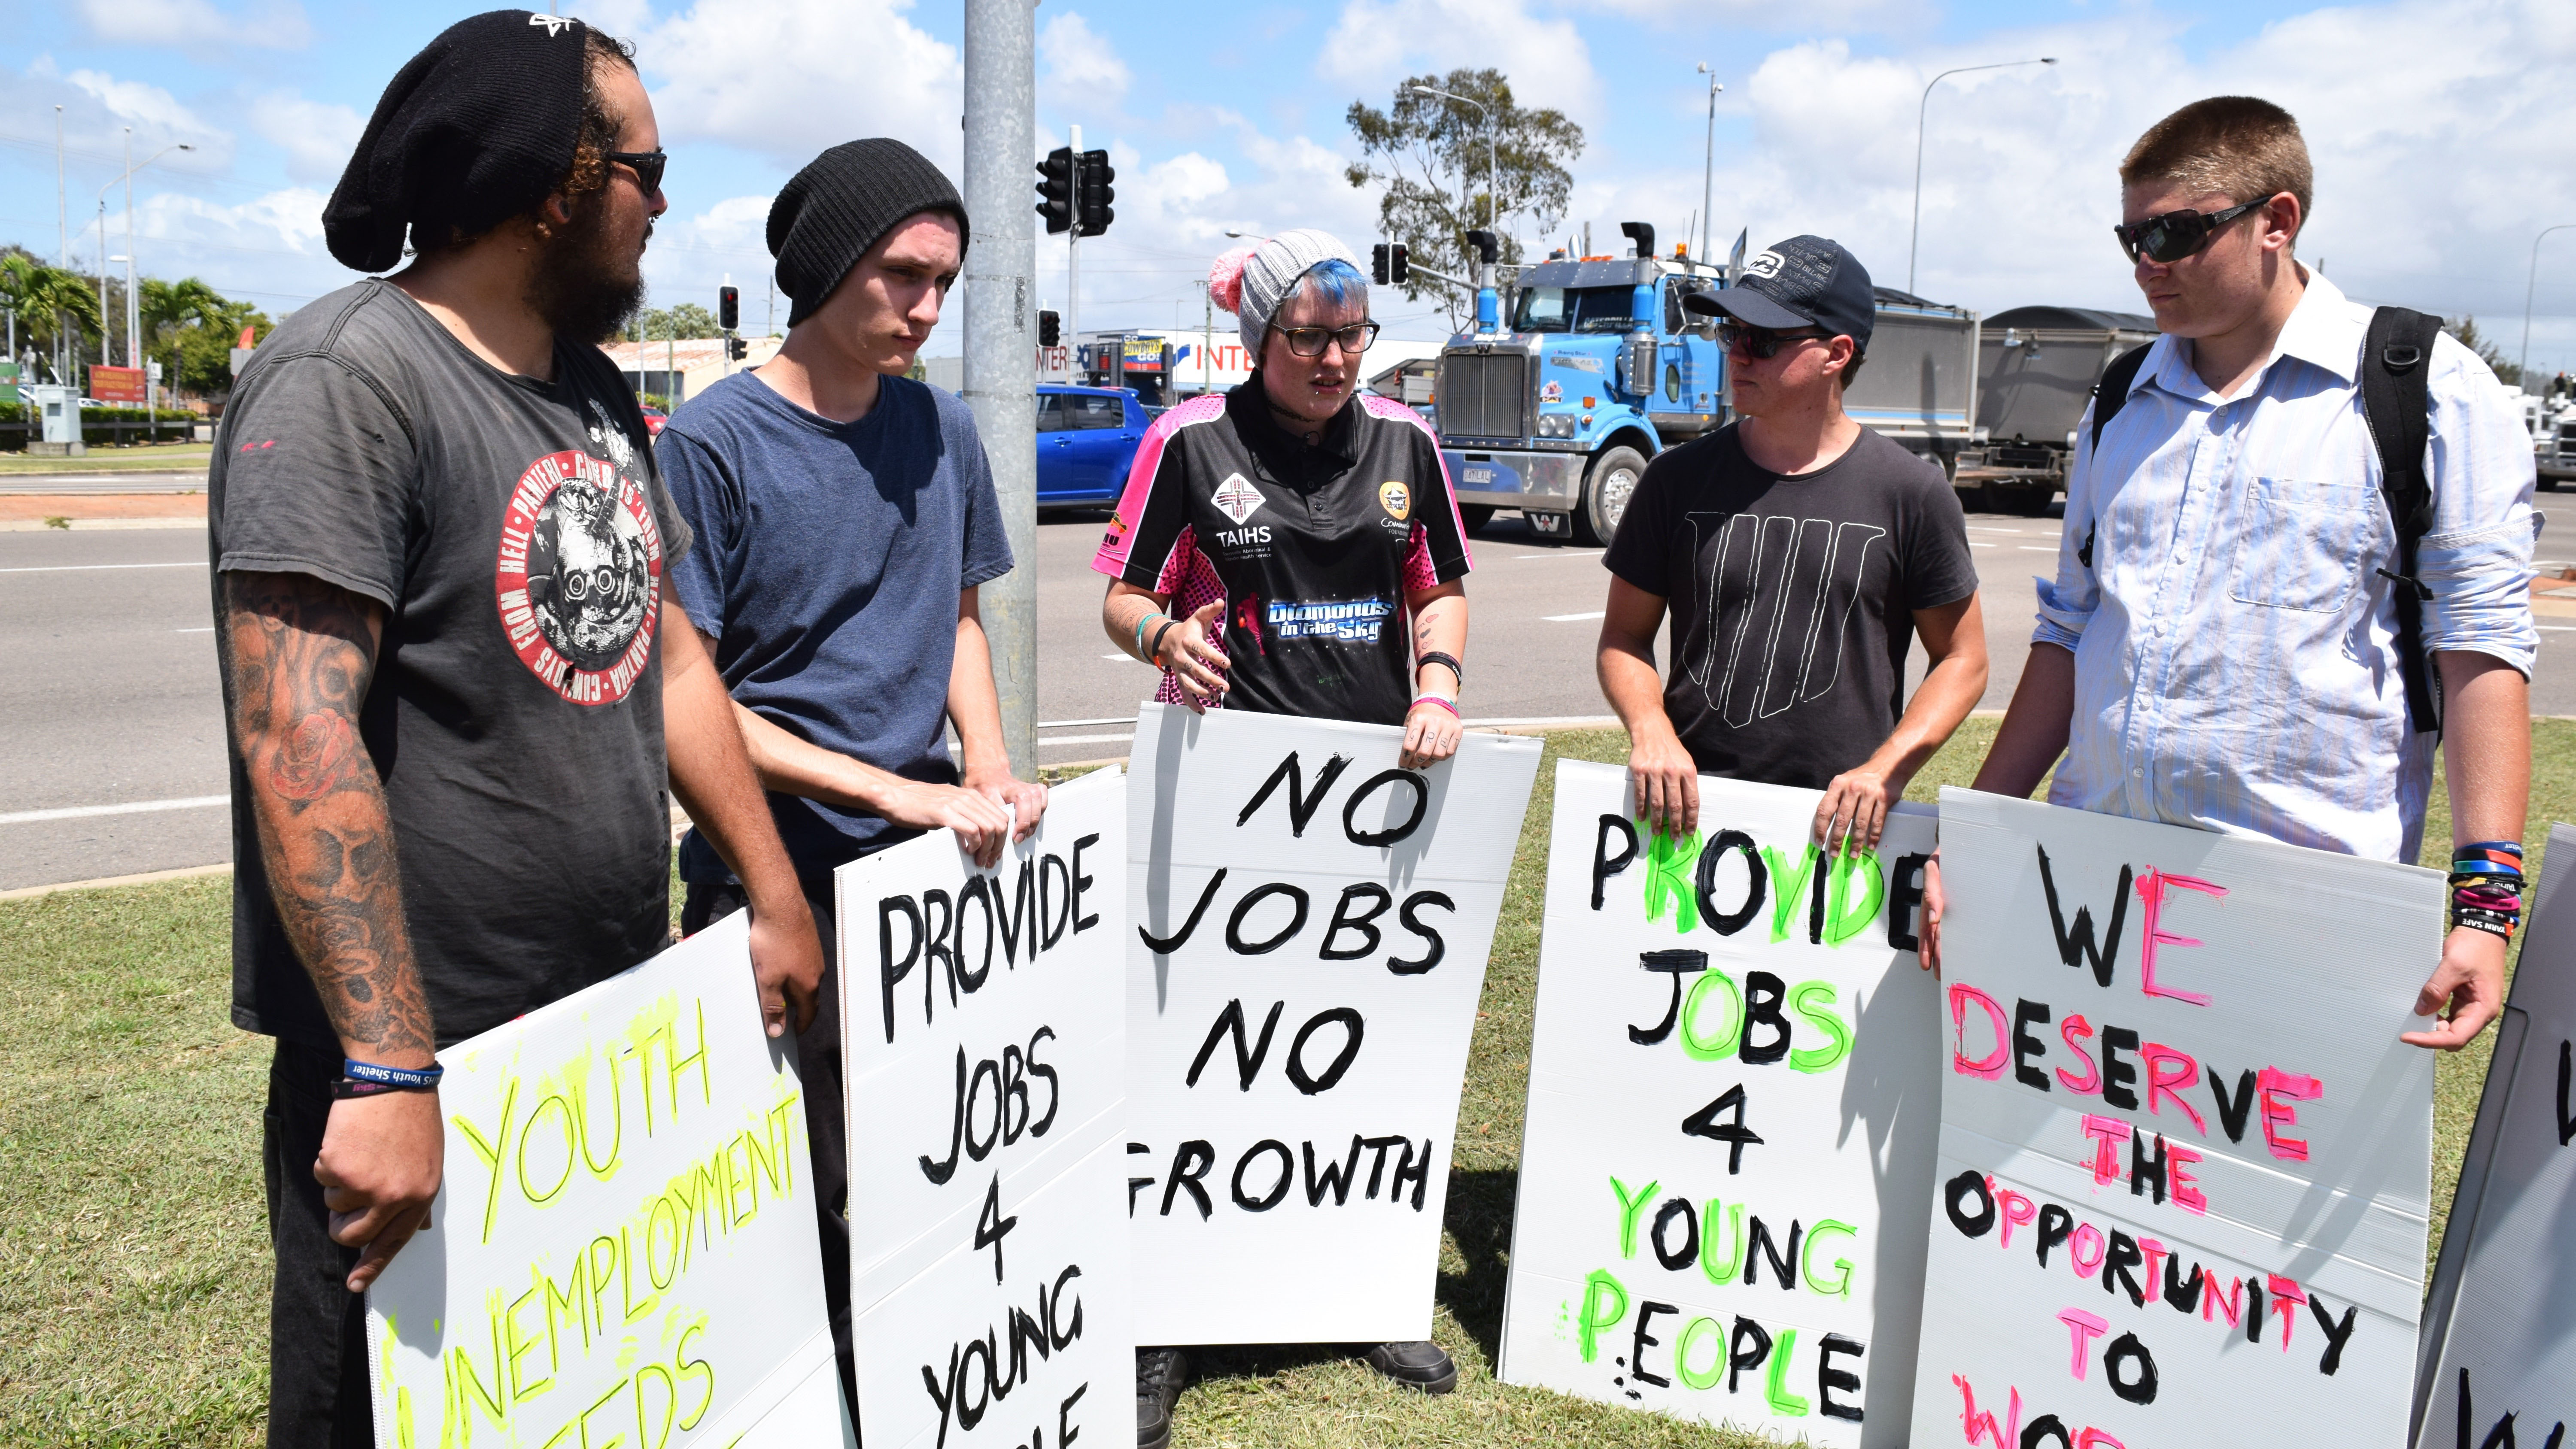 A group of young people stand together holding signs that read "provide jobs for young people".